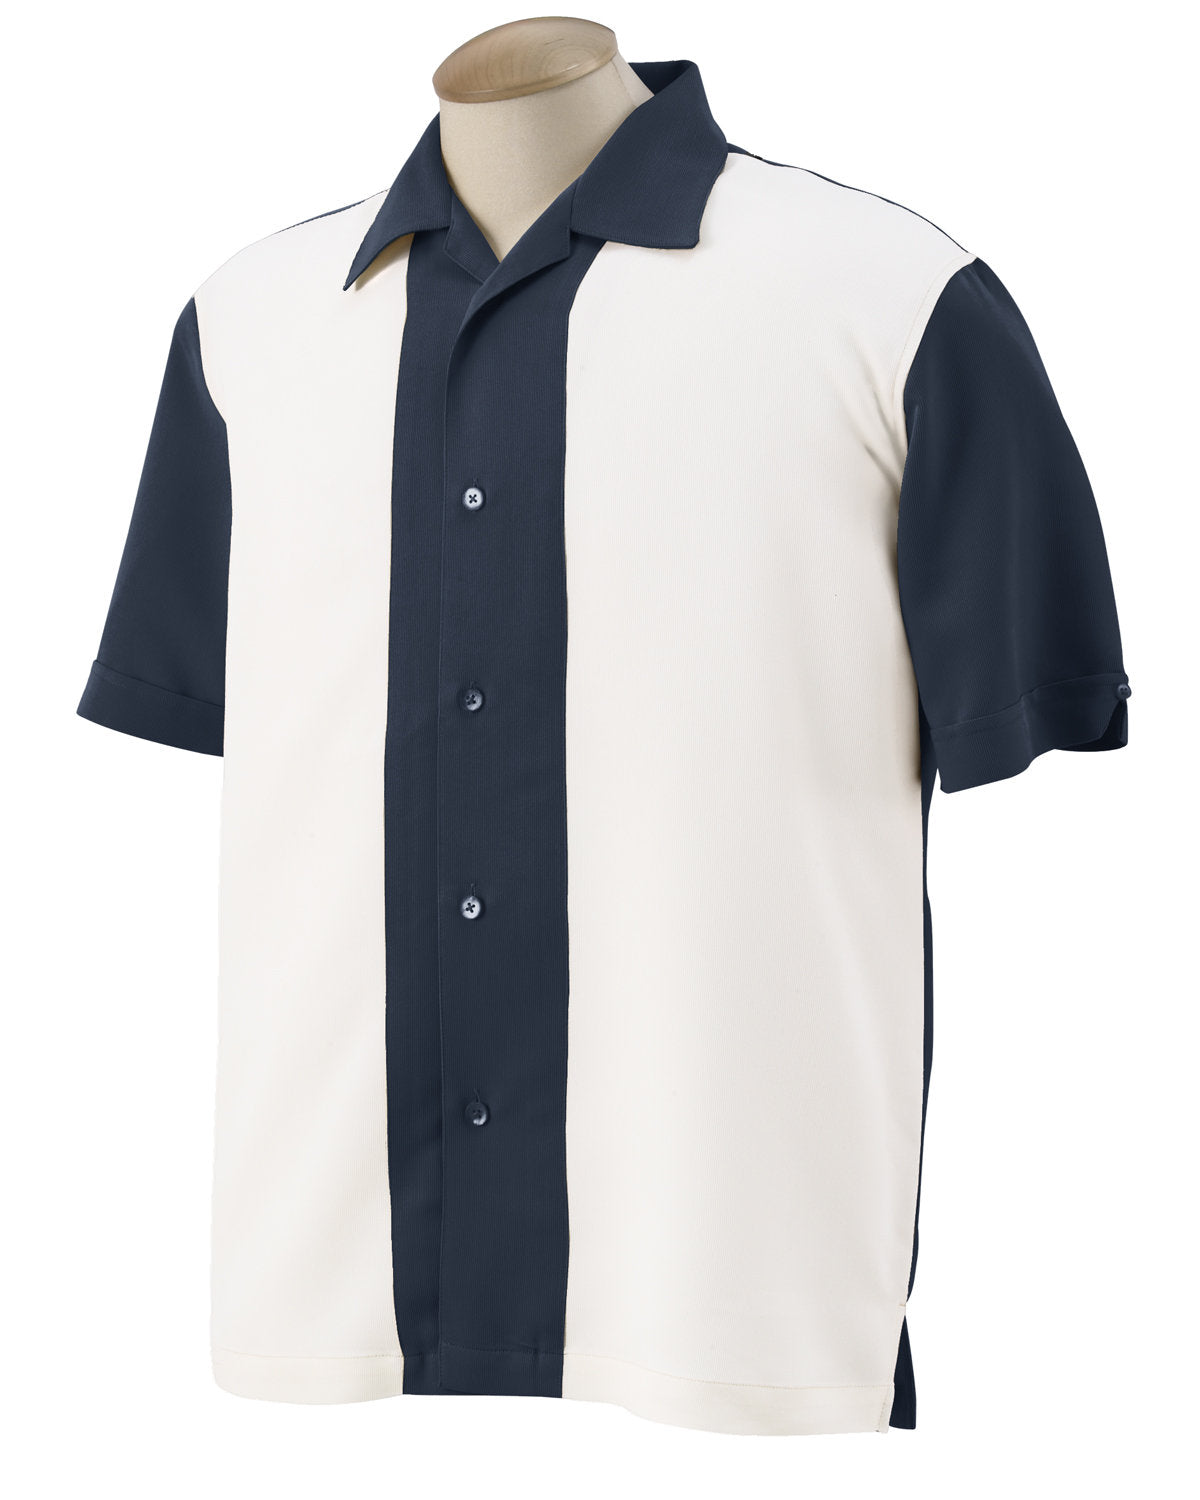 Relaxed Fit Retro Bowling Shirts for Men - The Harper